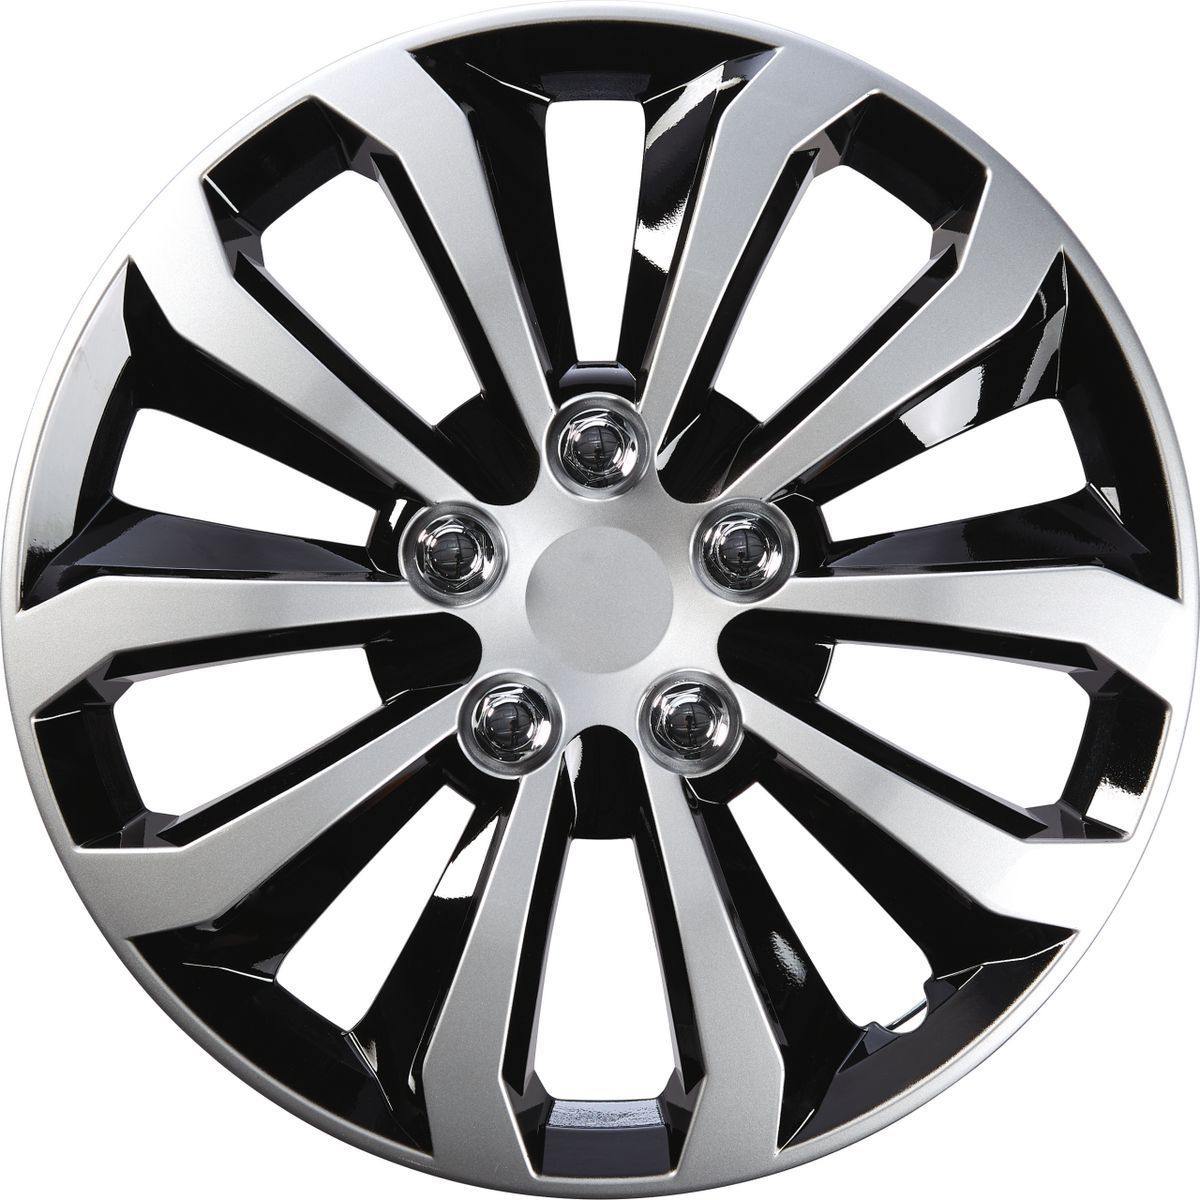 Wheel Covers - Modern Auto Parts 